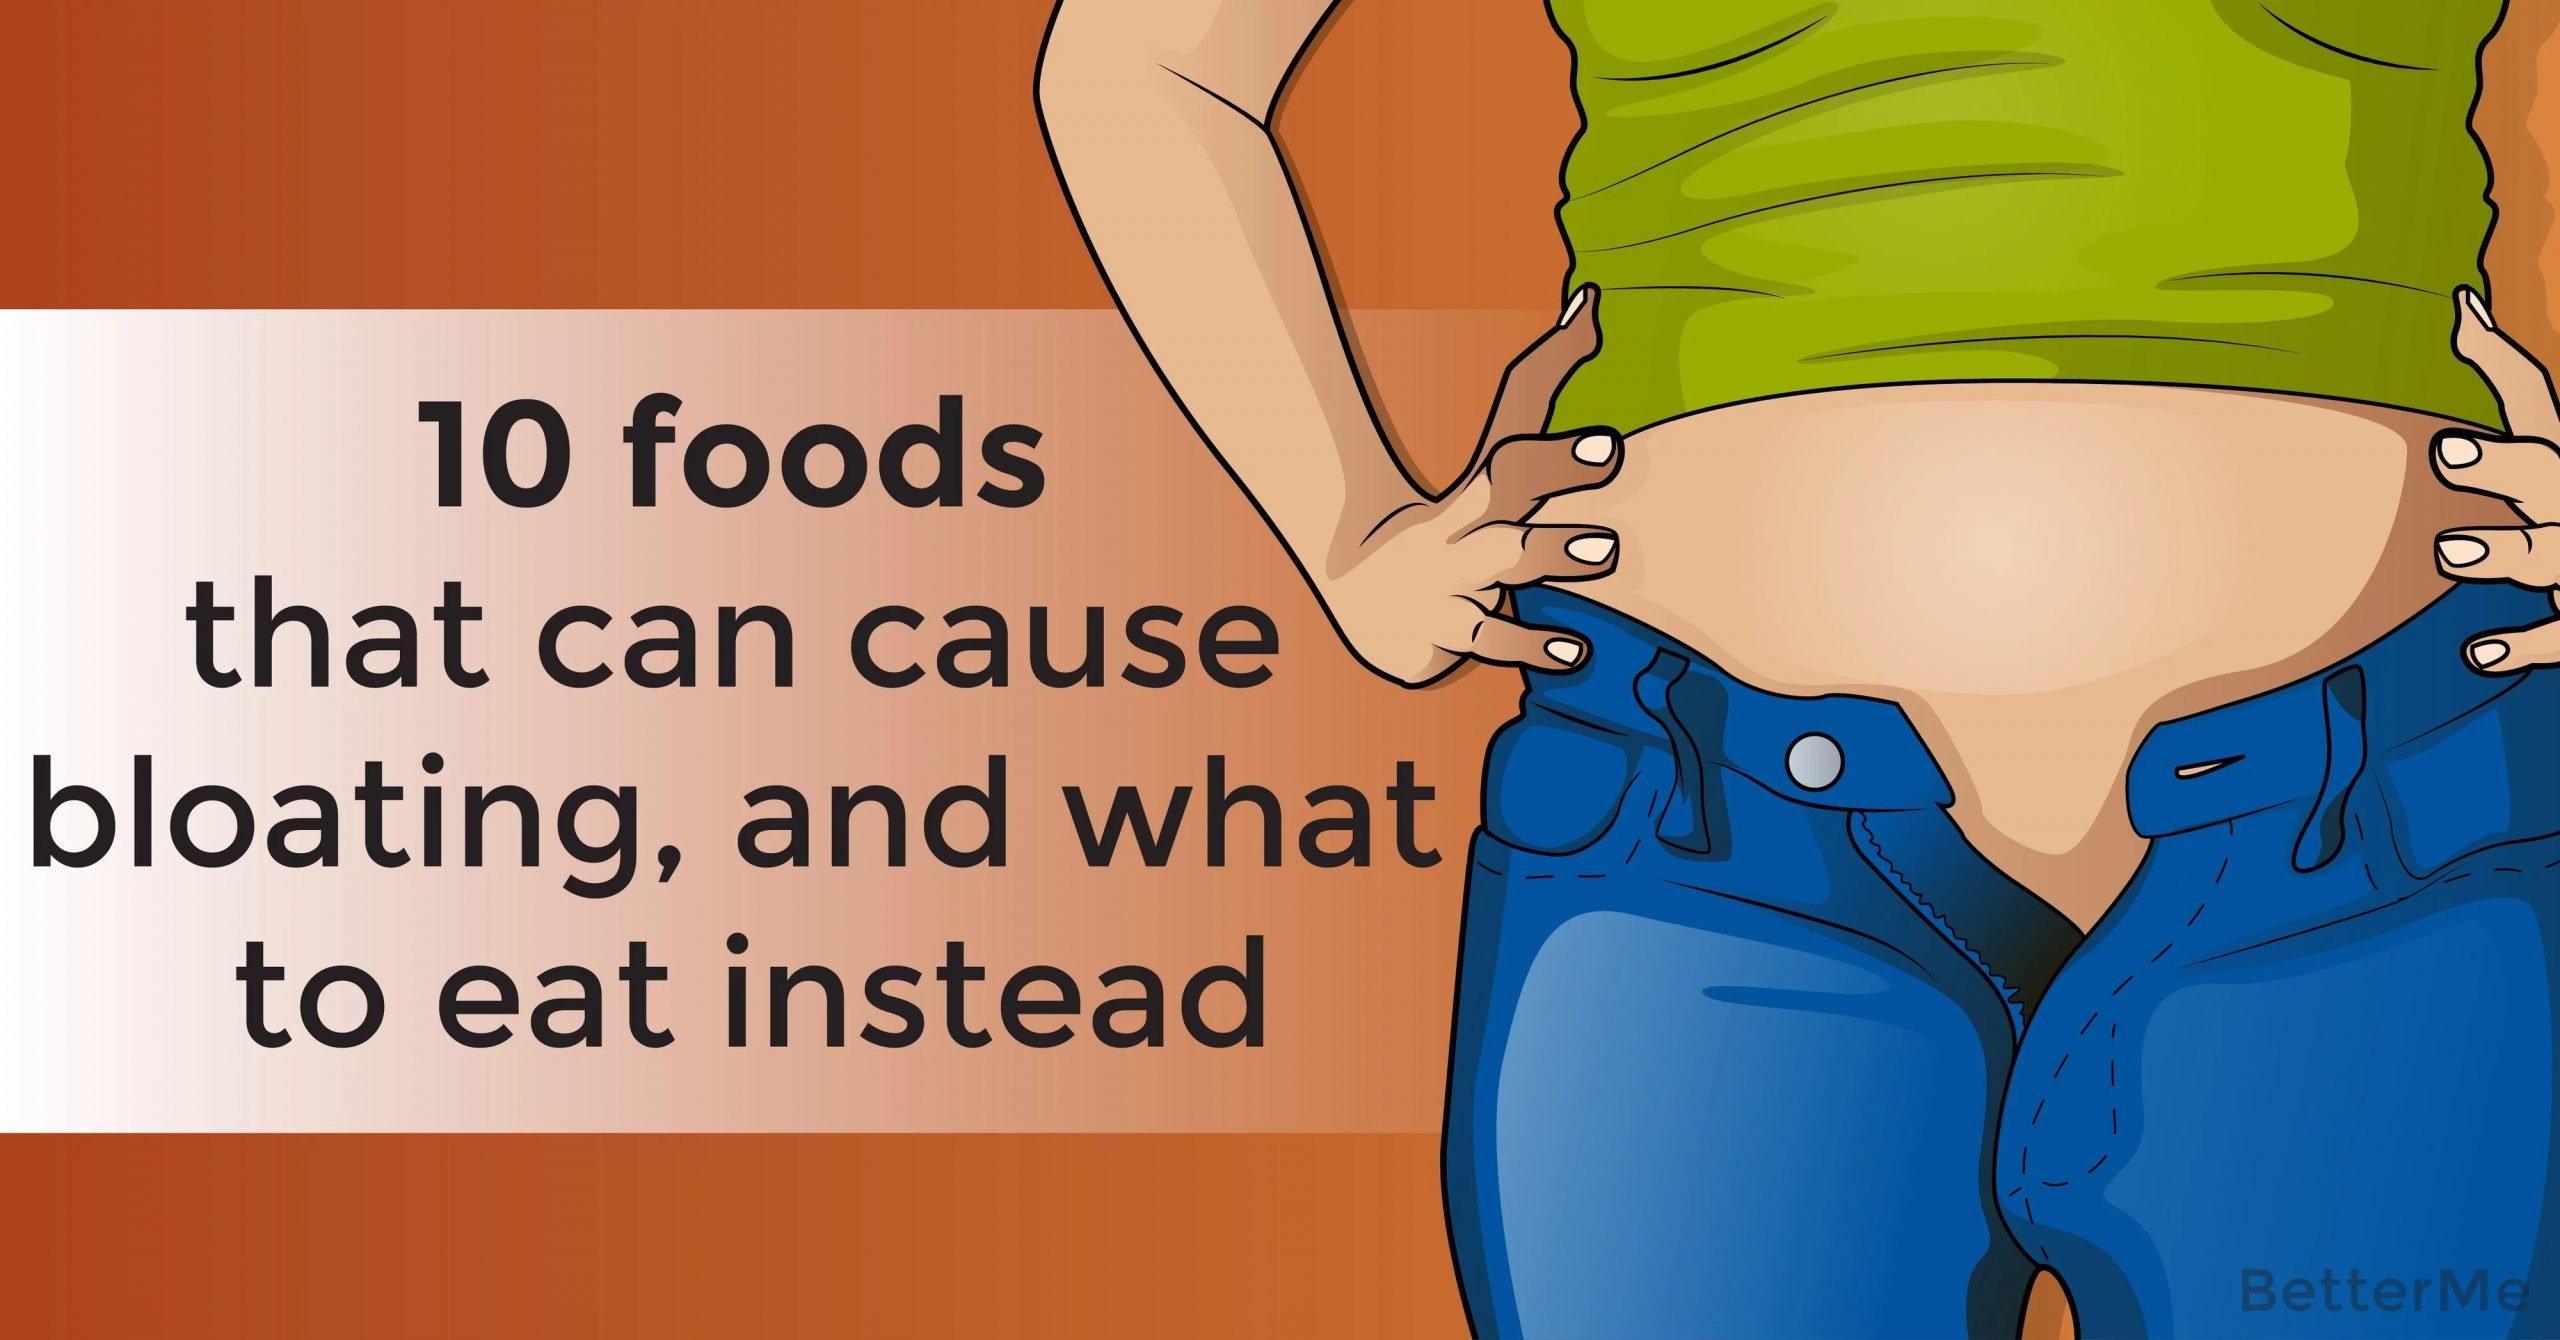 The top 10 foods that can cause bloating